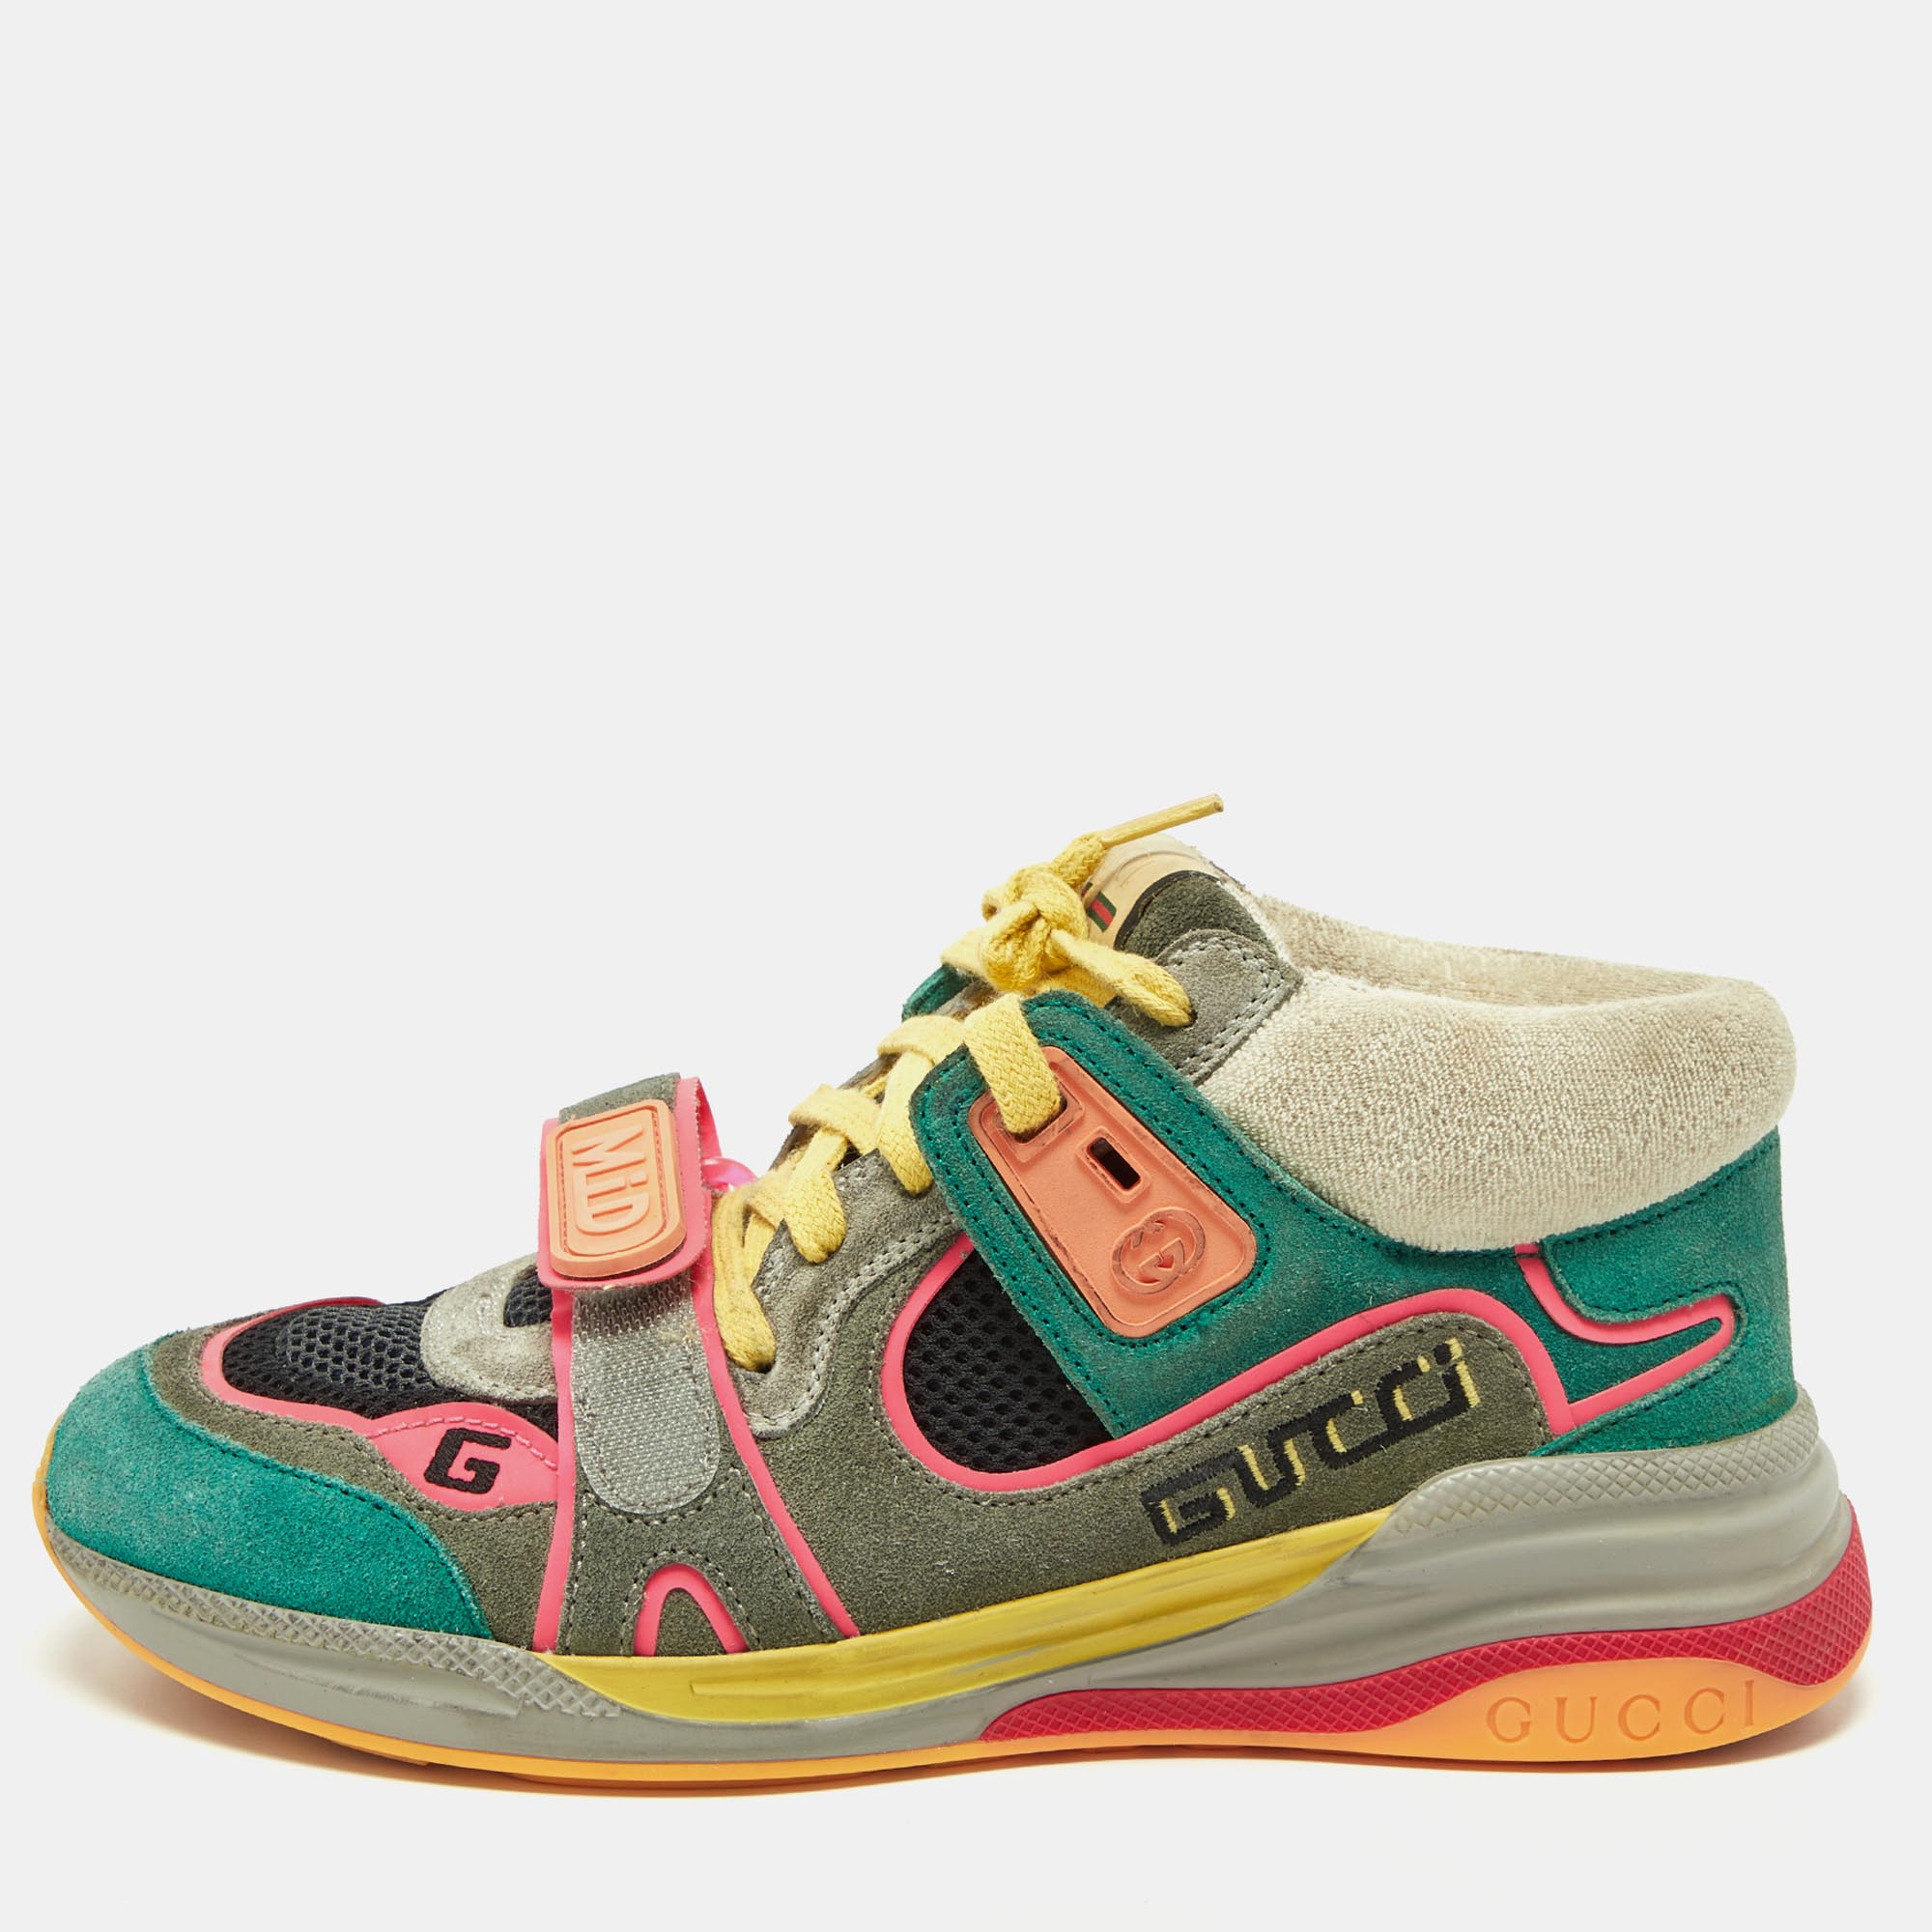 Gucci multicolor mesh and suede ultrapace mid top sneakers size 37